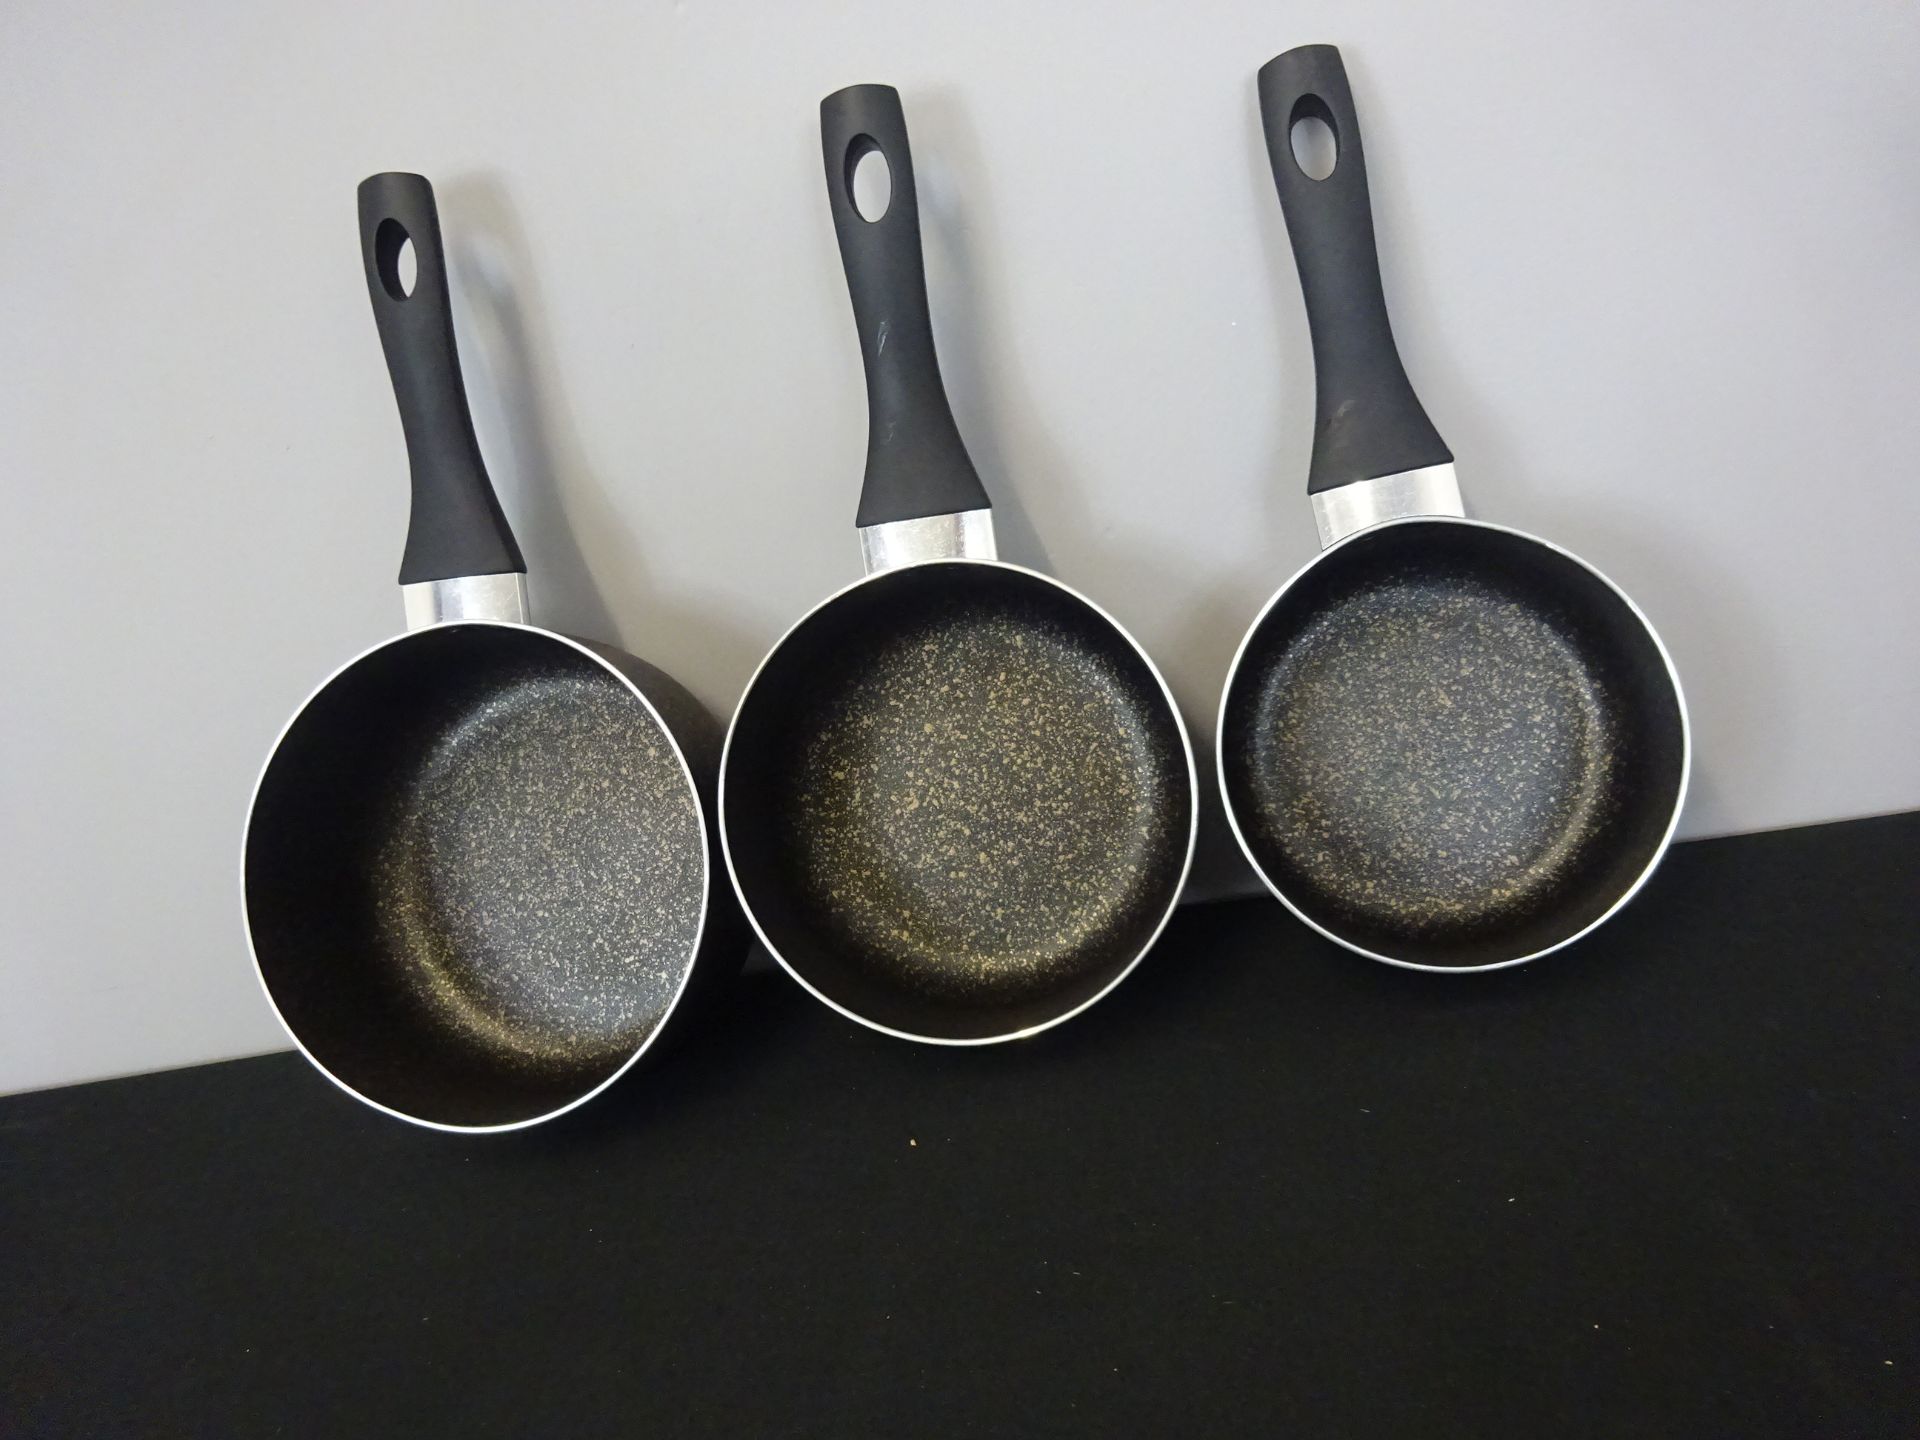 Rusel Hobbs 6 Piece Stainless Steel Non Stick Cookware Set RRP £29.99 - Image 3 of 3